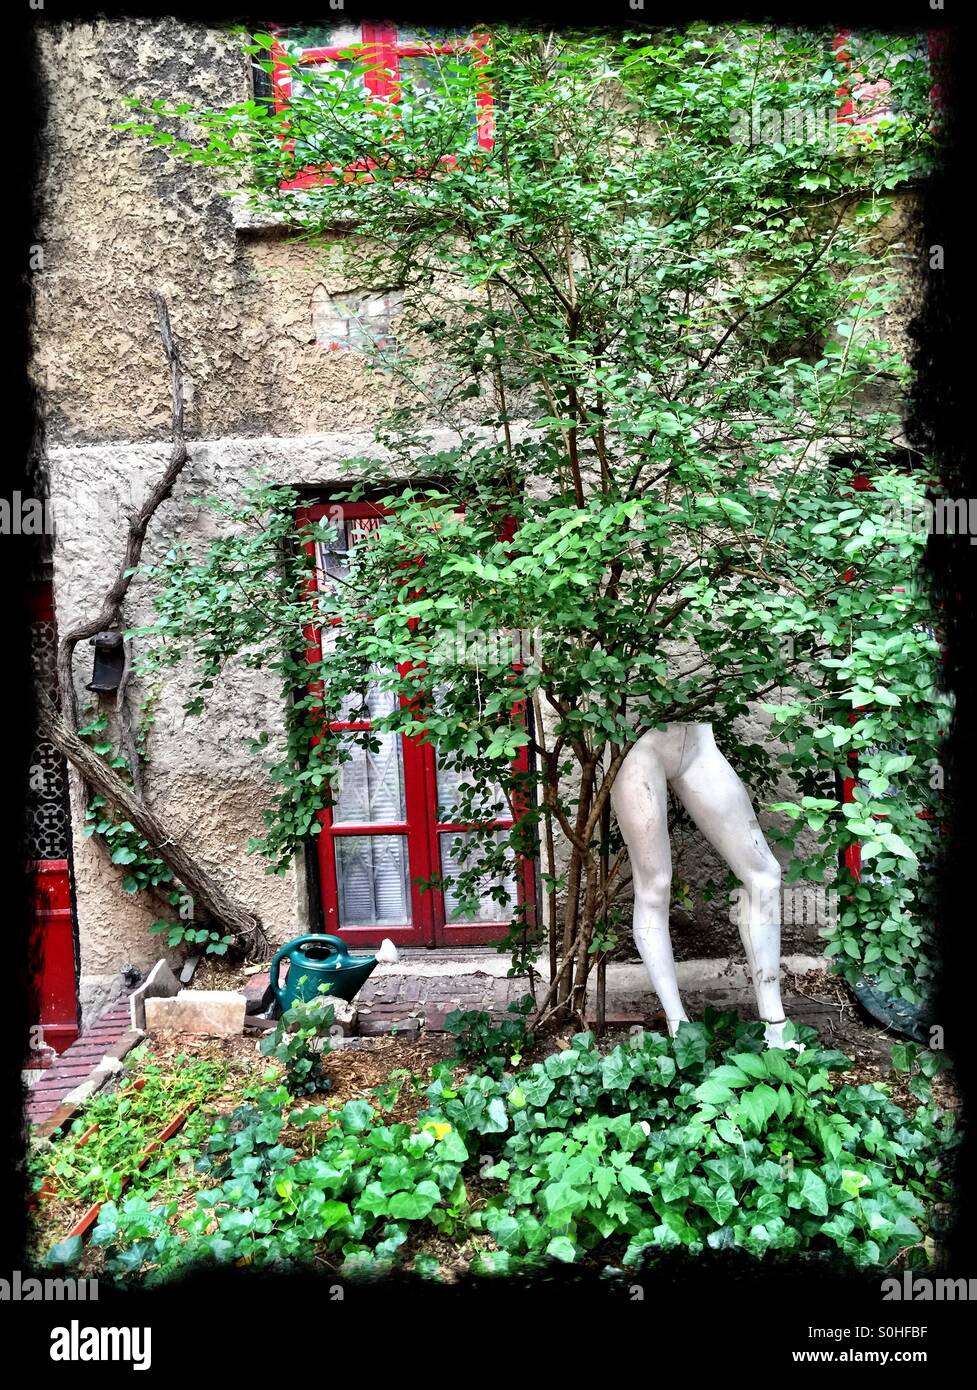 Tree with human mannequin legs in a garden in Greenwich Village looks surreal. Stock Photo